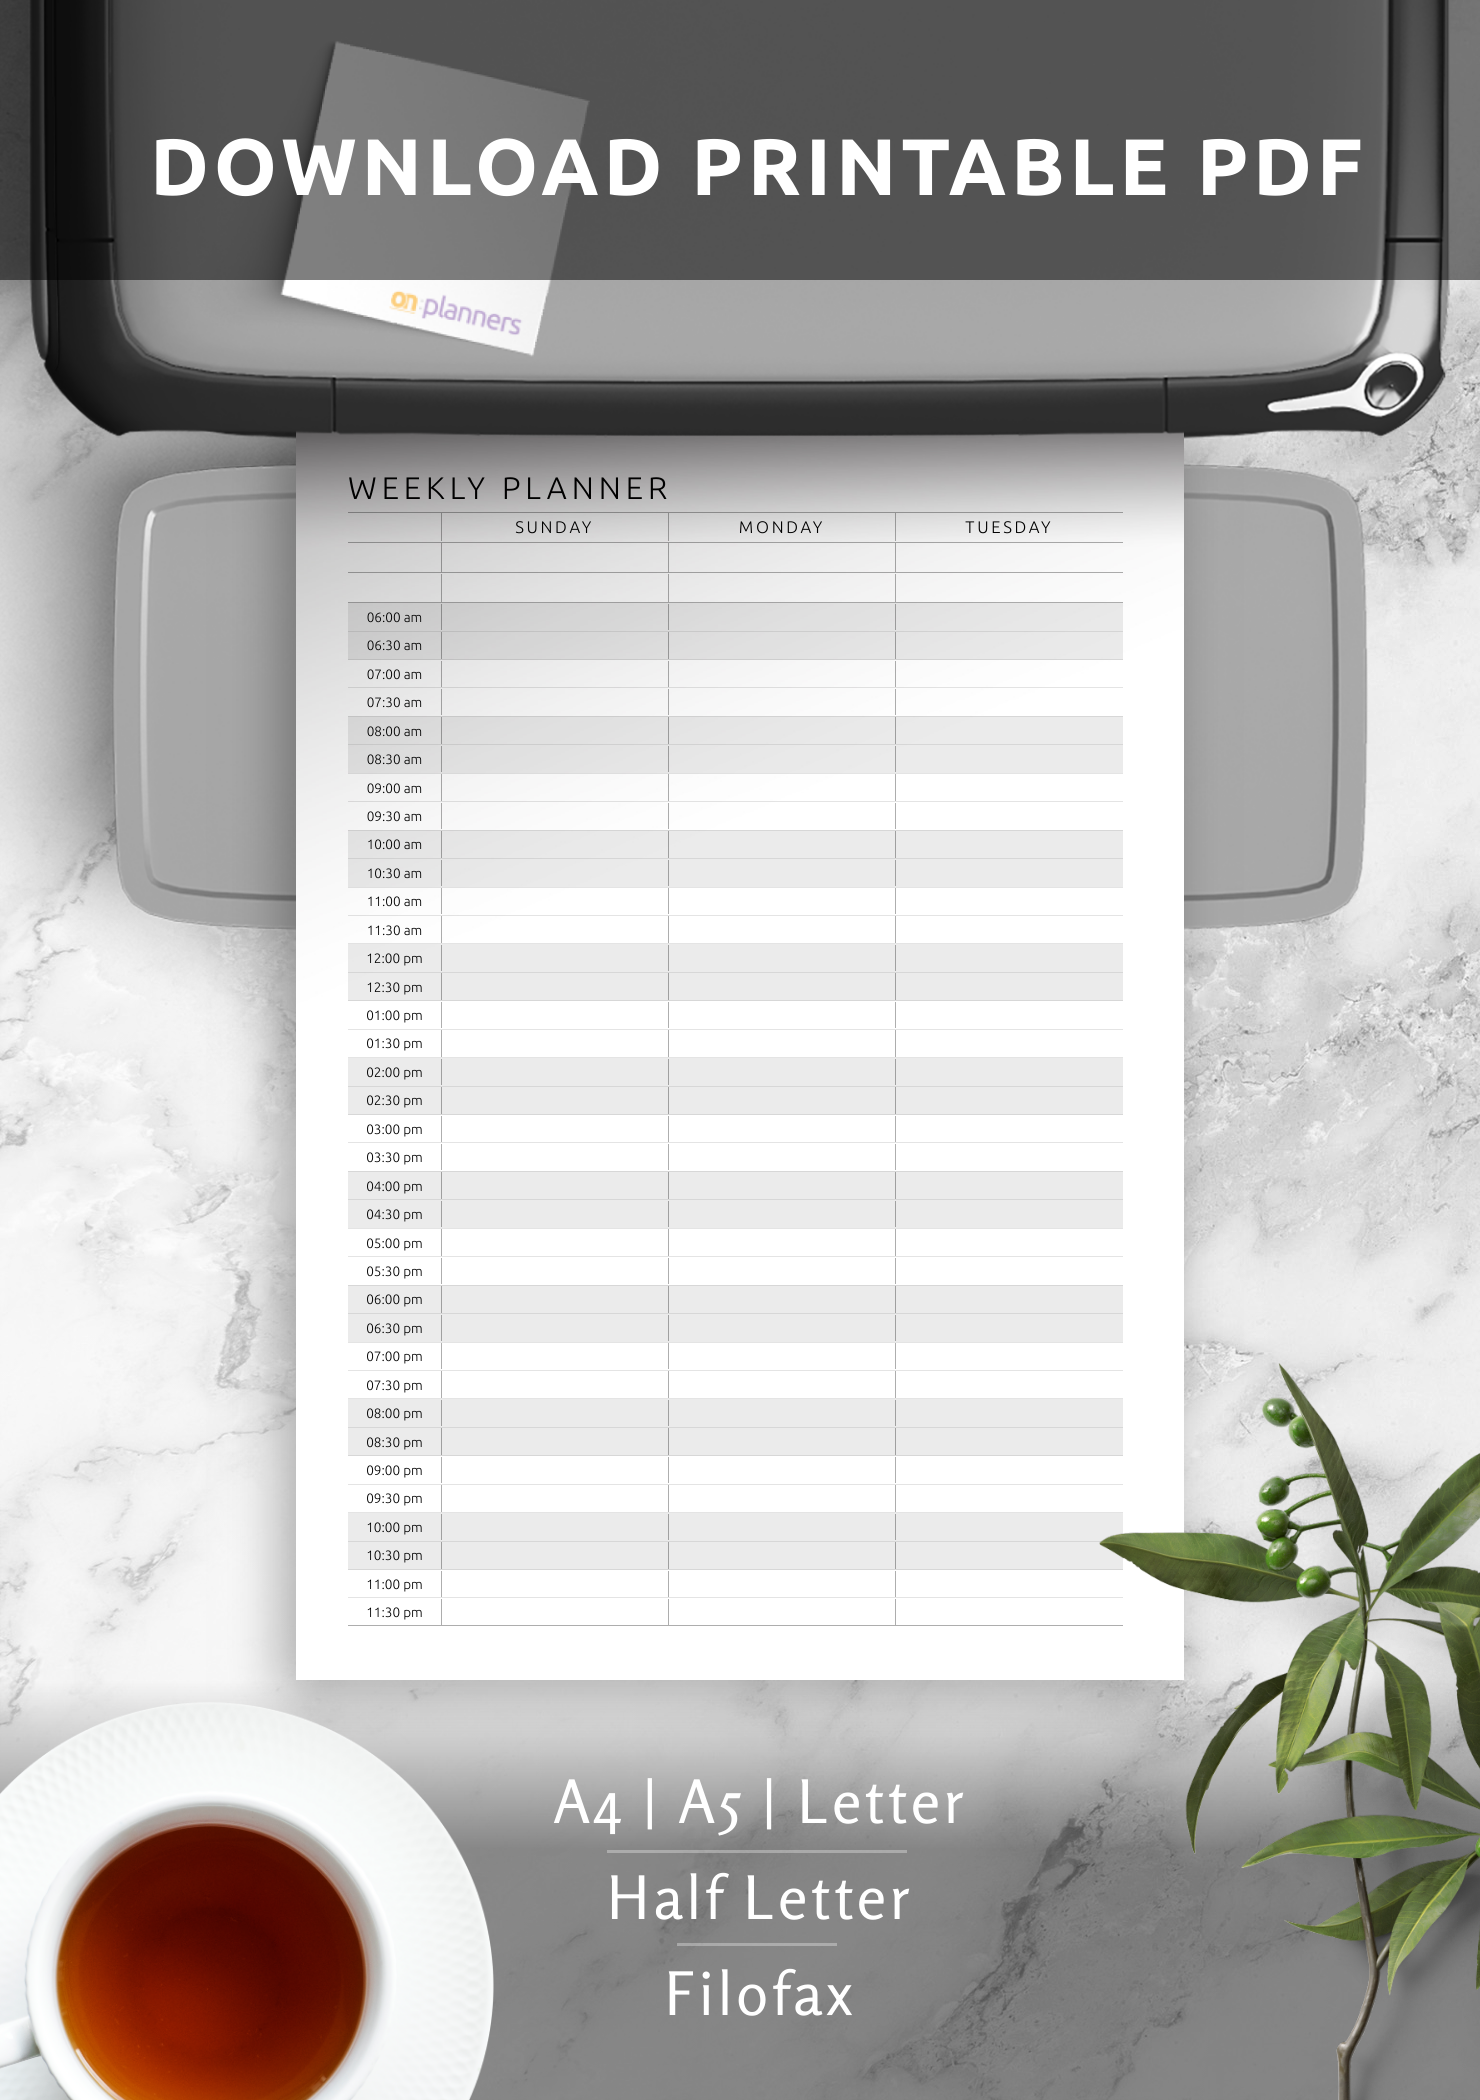 Half Hour Weekly Schedule on 2 Pages, Weekly Planner Printable, Week at a  Glance, Weekly to Do List, Weekly Agenda, A5/a4/letter/half Letter 